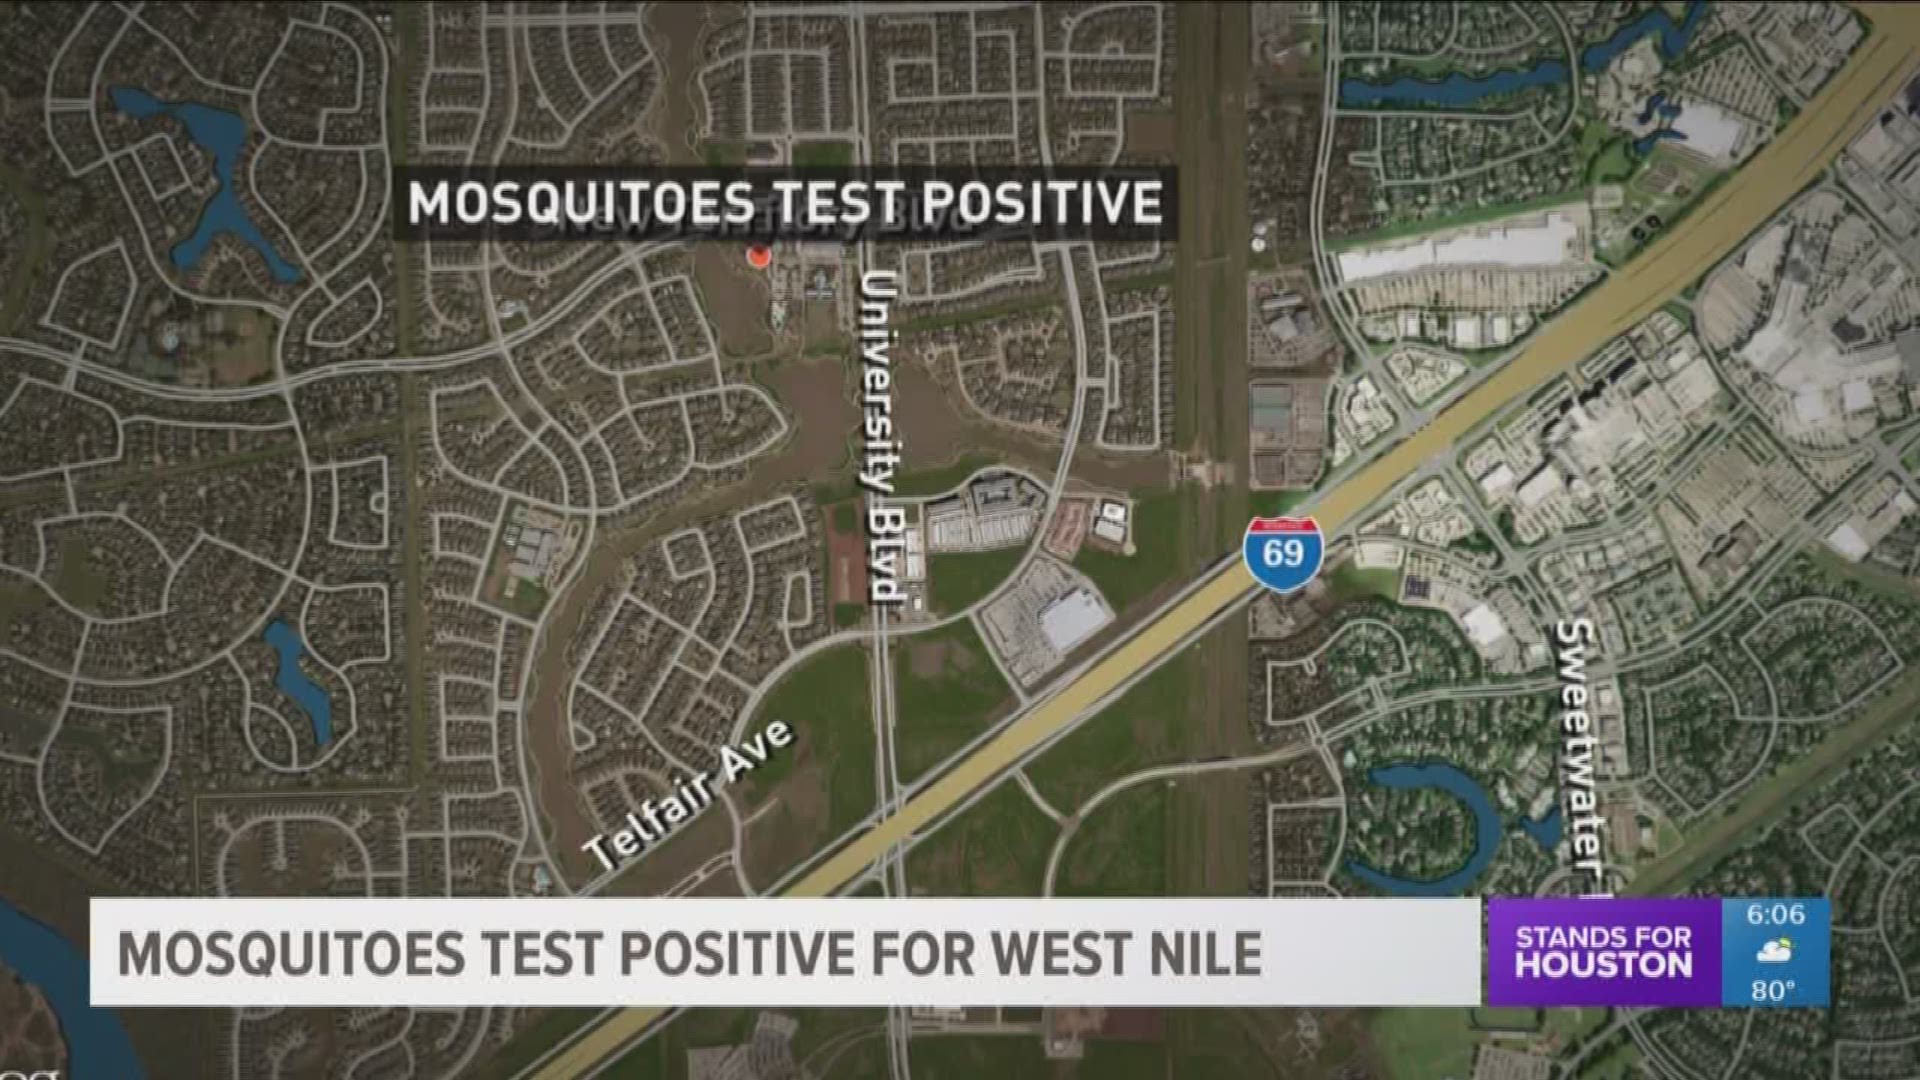 Sugar Land officials confirmed the presence of the West Nile virus at a mosquito trap on University Boulevard near the Houston Museum of Natural Science in the Telfair subdivision.